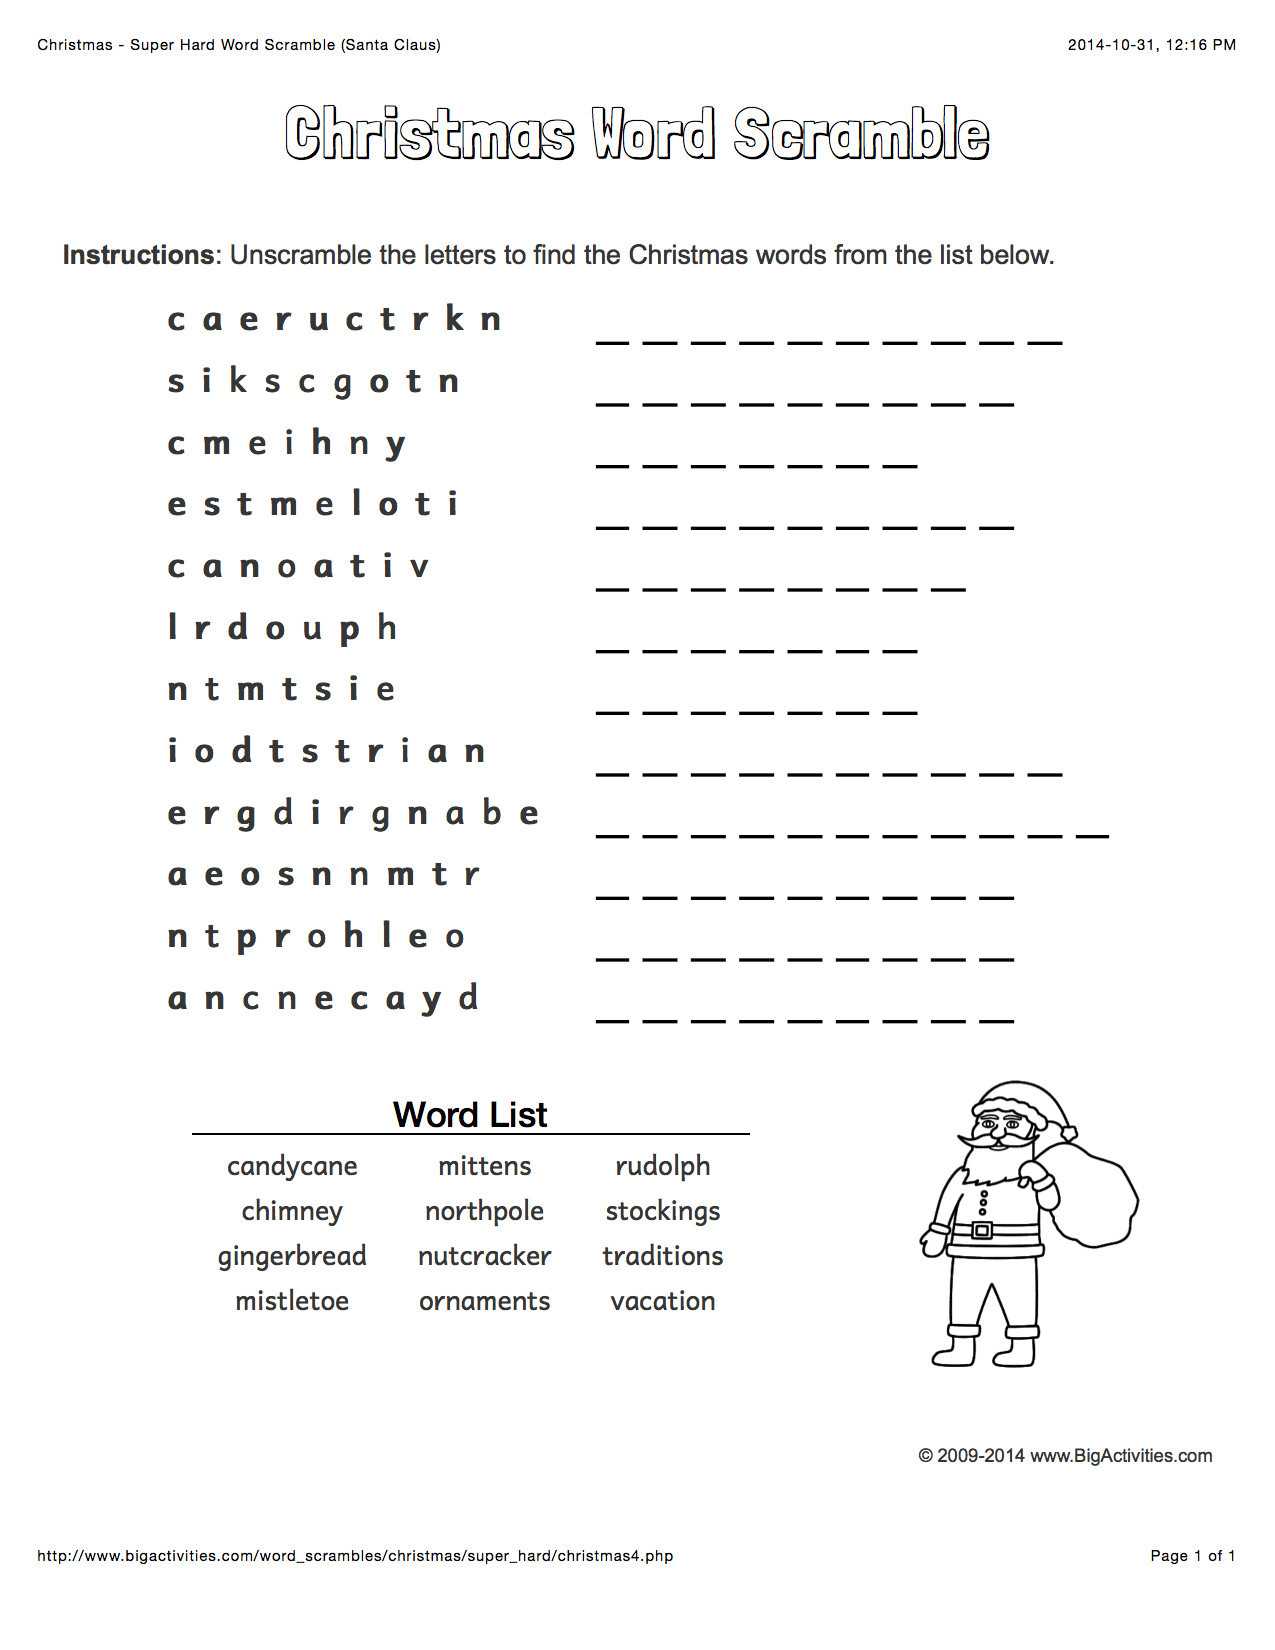 unscramble-the-jumbled-words-worksheets-for-5th-grade-your-home-teacher